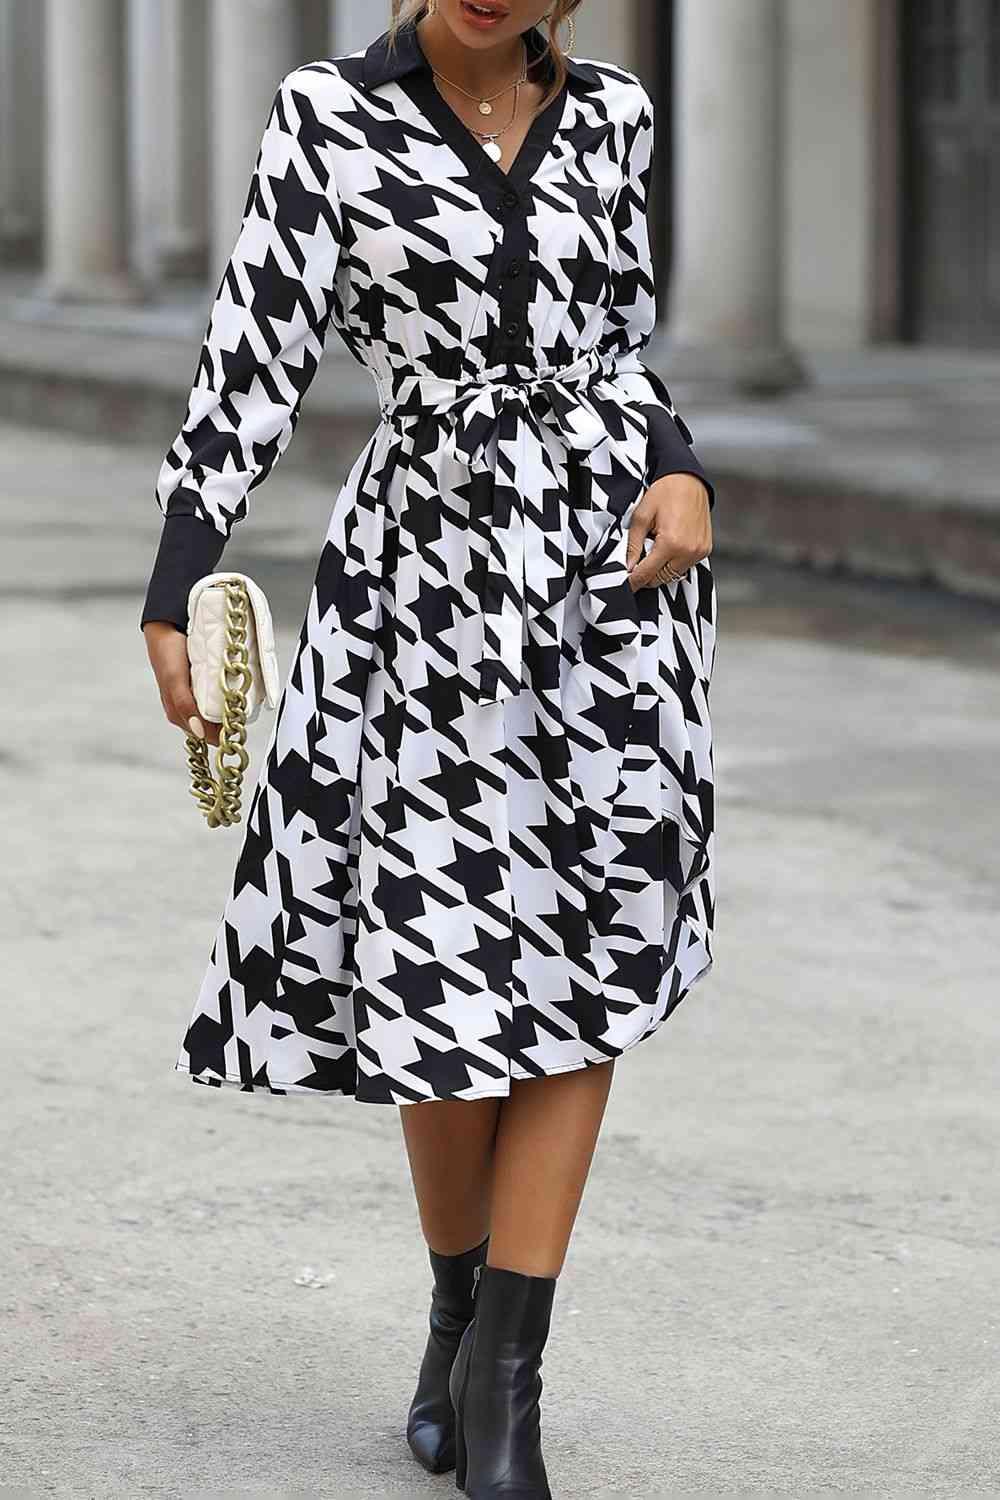 a woman in a black and white dress is walking down the street